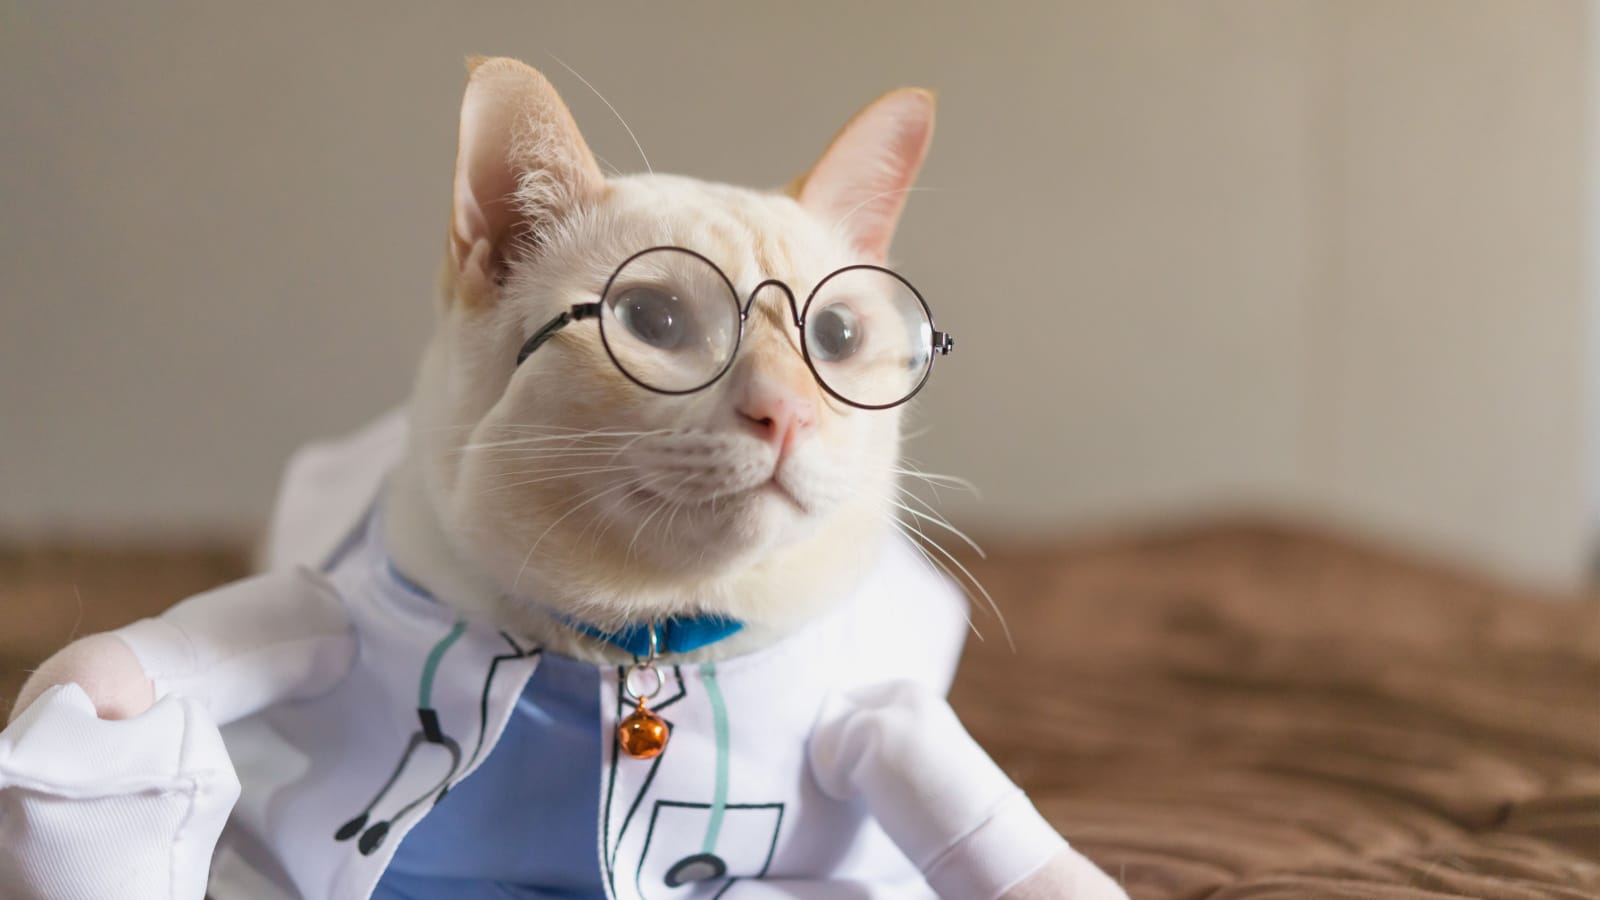 Cat dressed up as doctor or nurse